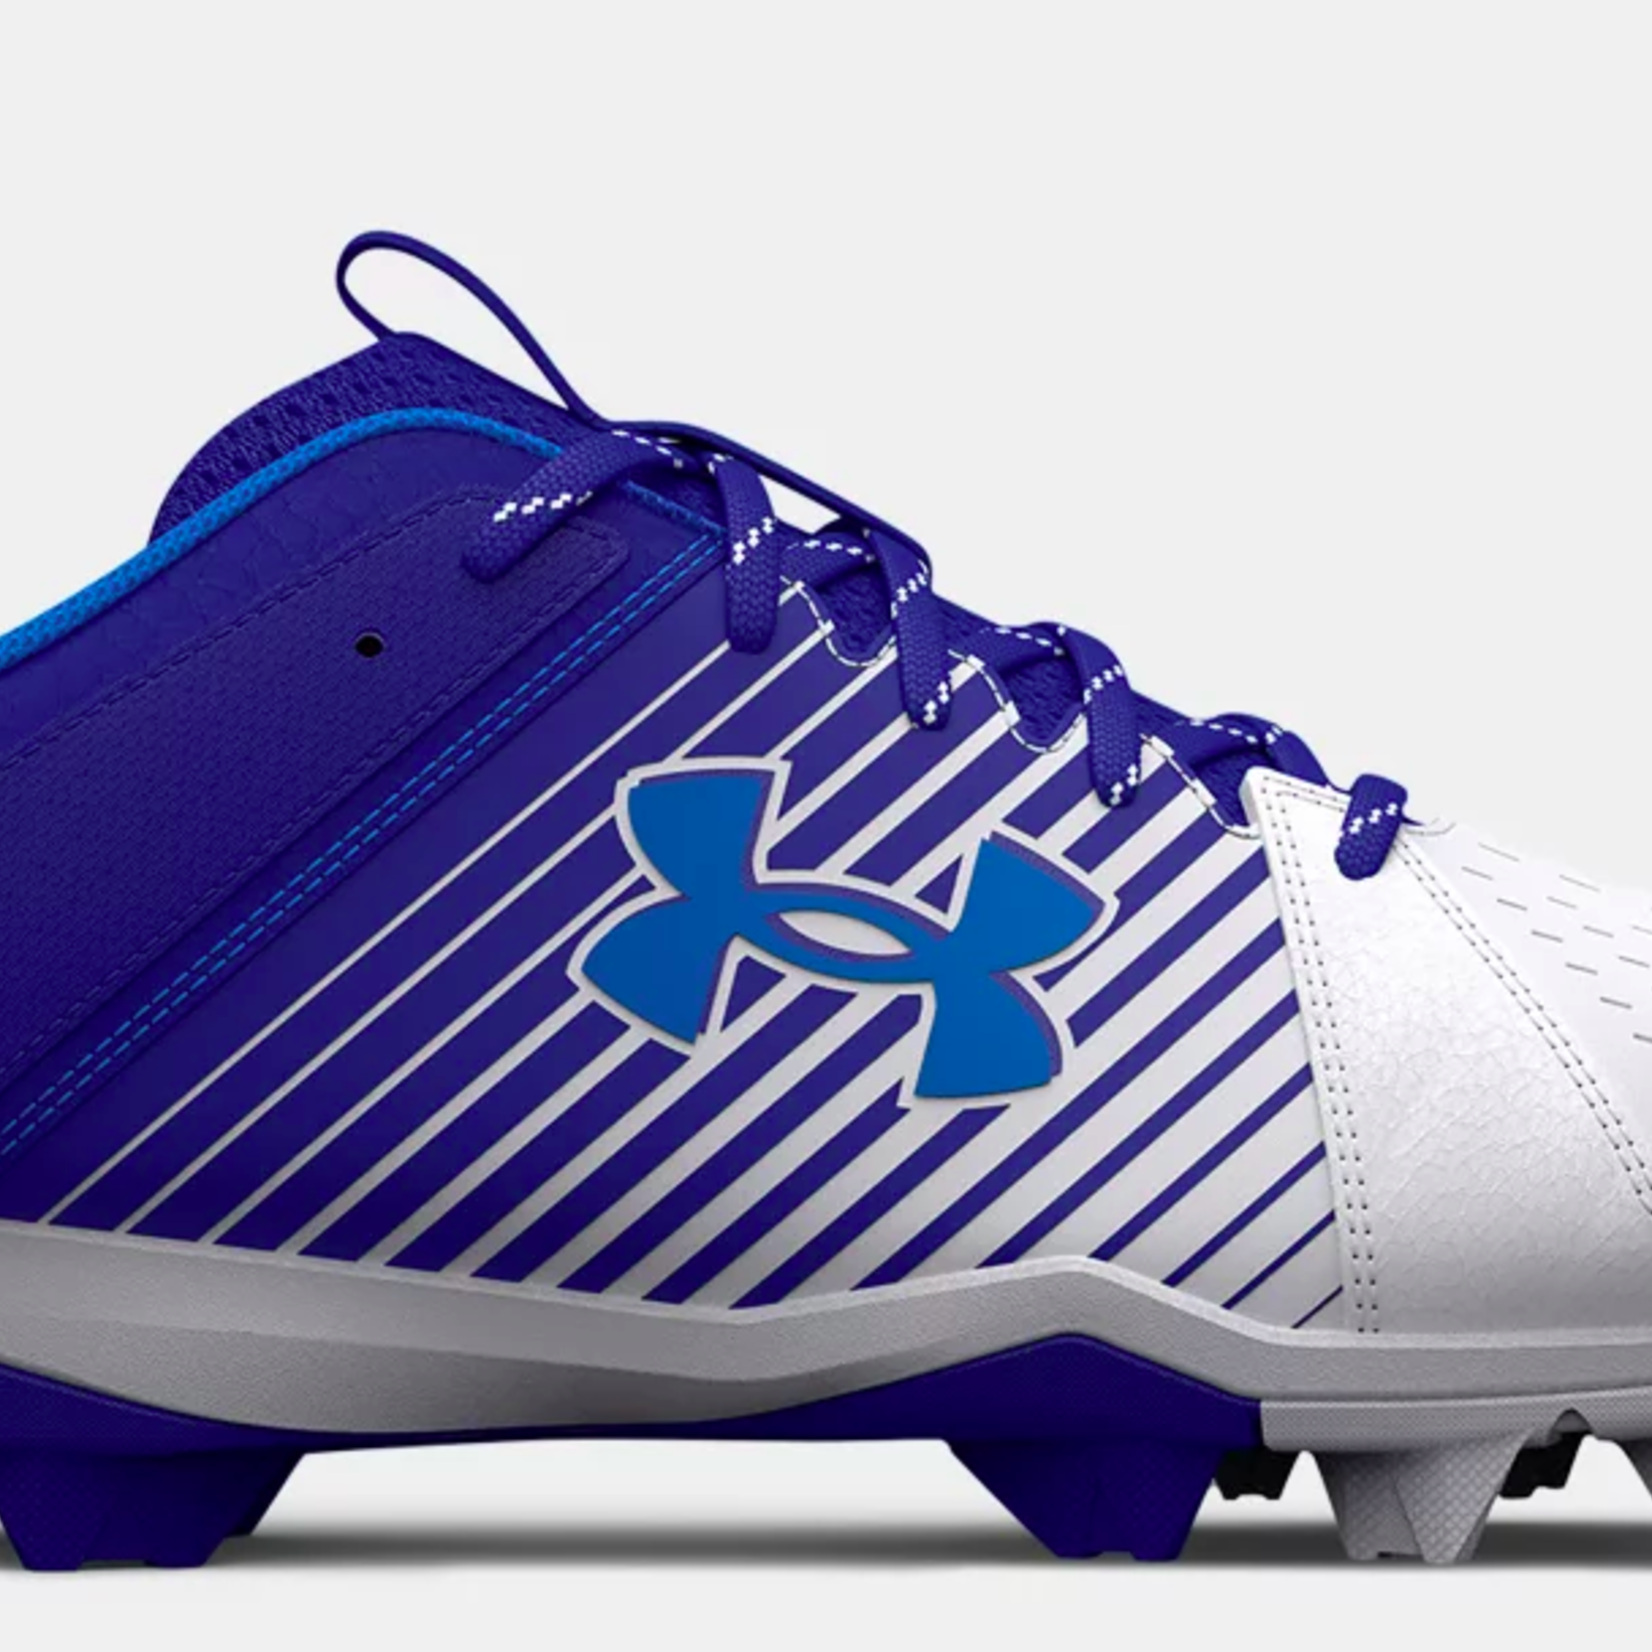 Under Armour Under Armour Baseball Shoes, Leadoff Low RM, Mens